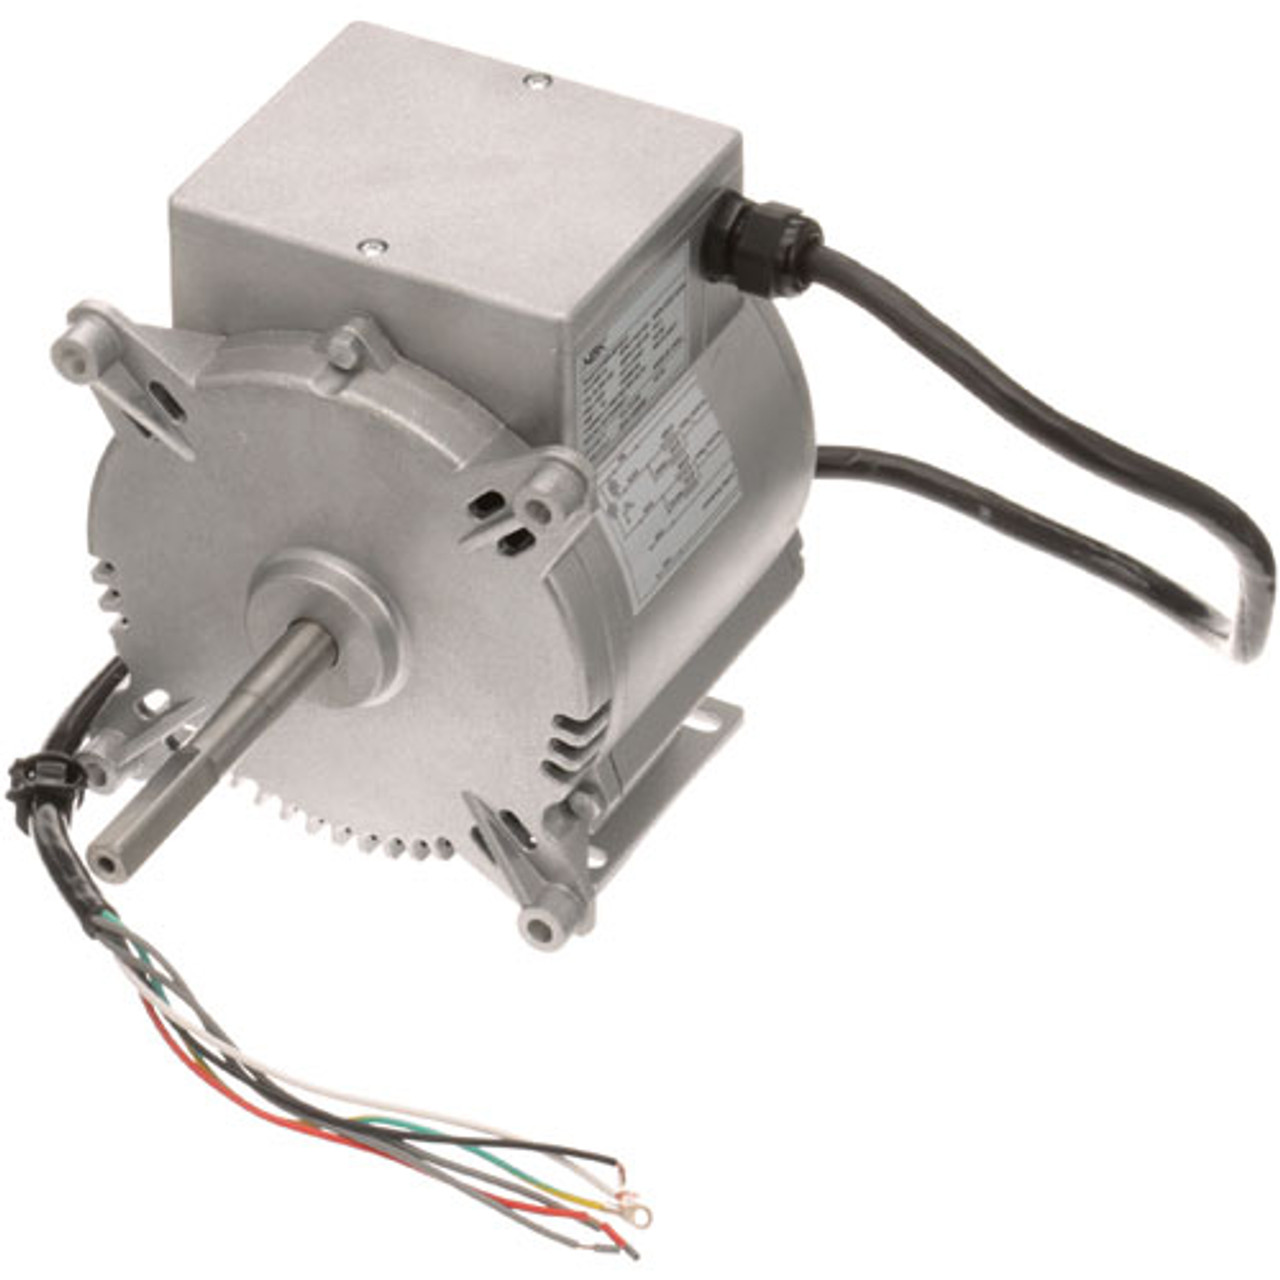 Motor, 2-Speed, 208-240V , 1/3Hp, 1725/1140 - Replacement Part For Blodgett BL32244